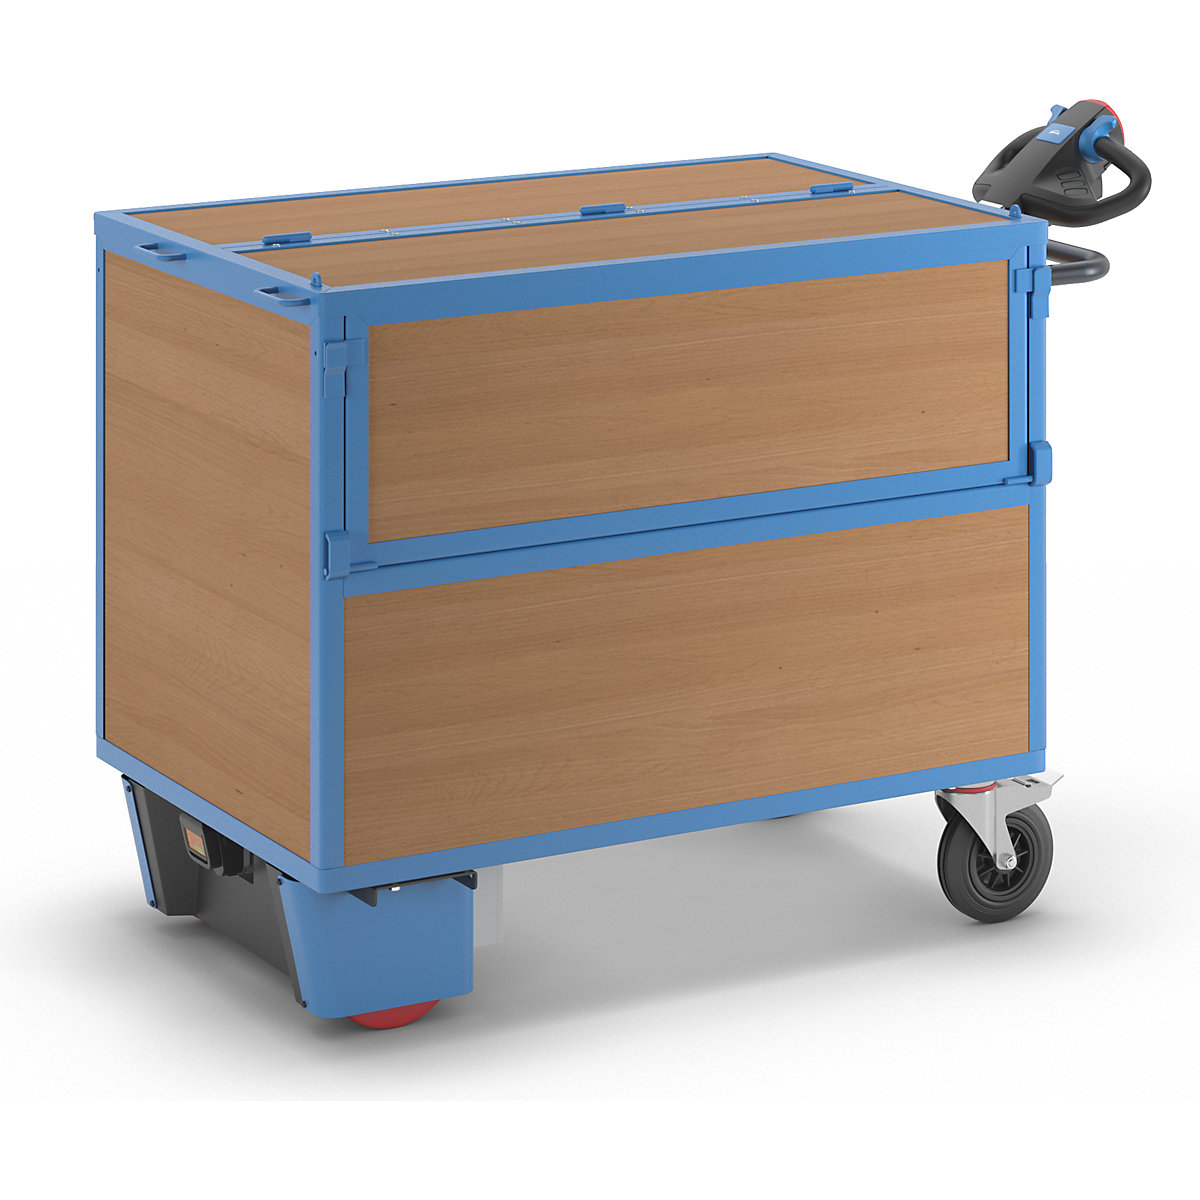 Box truck with electric drive – eurokraft pro, walls made of MDF panels, with lid, LxWxH 1630 x 830 x 1200 mm-14